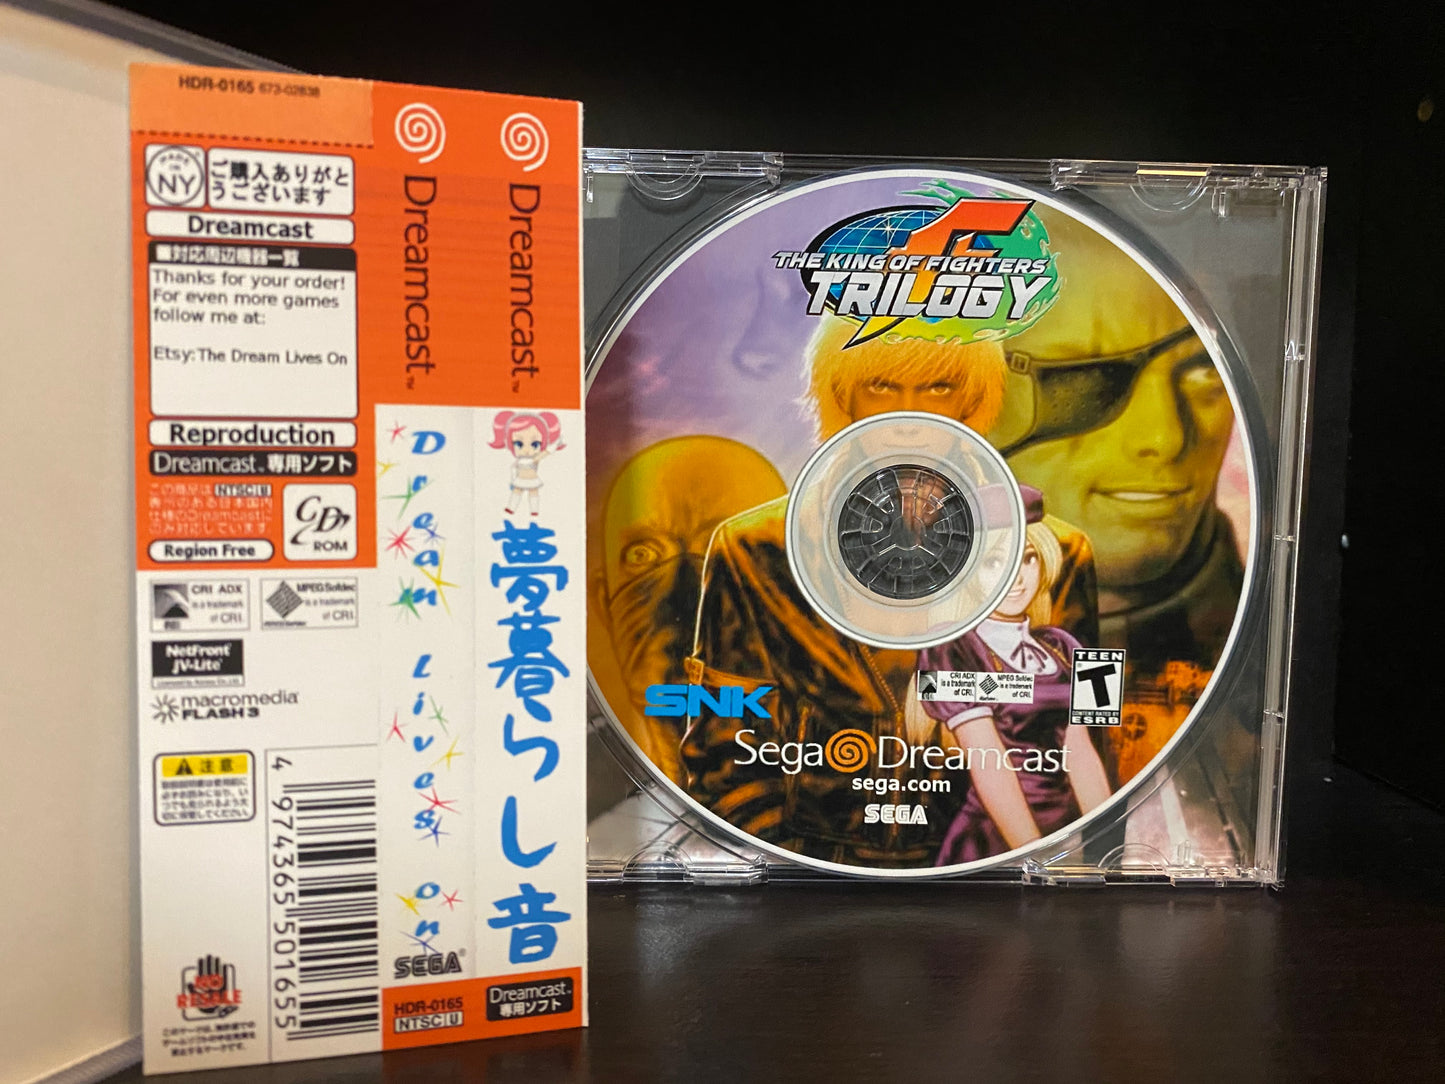 The King of Fighters Trilogy (KOF 99,2000 & 2002) [Sega Dreamcast] Reproduction